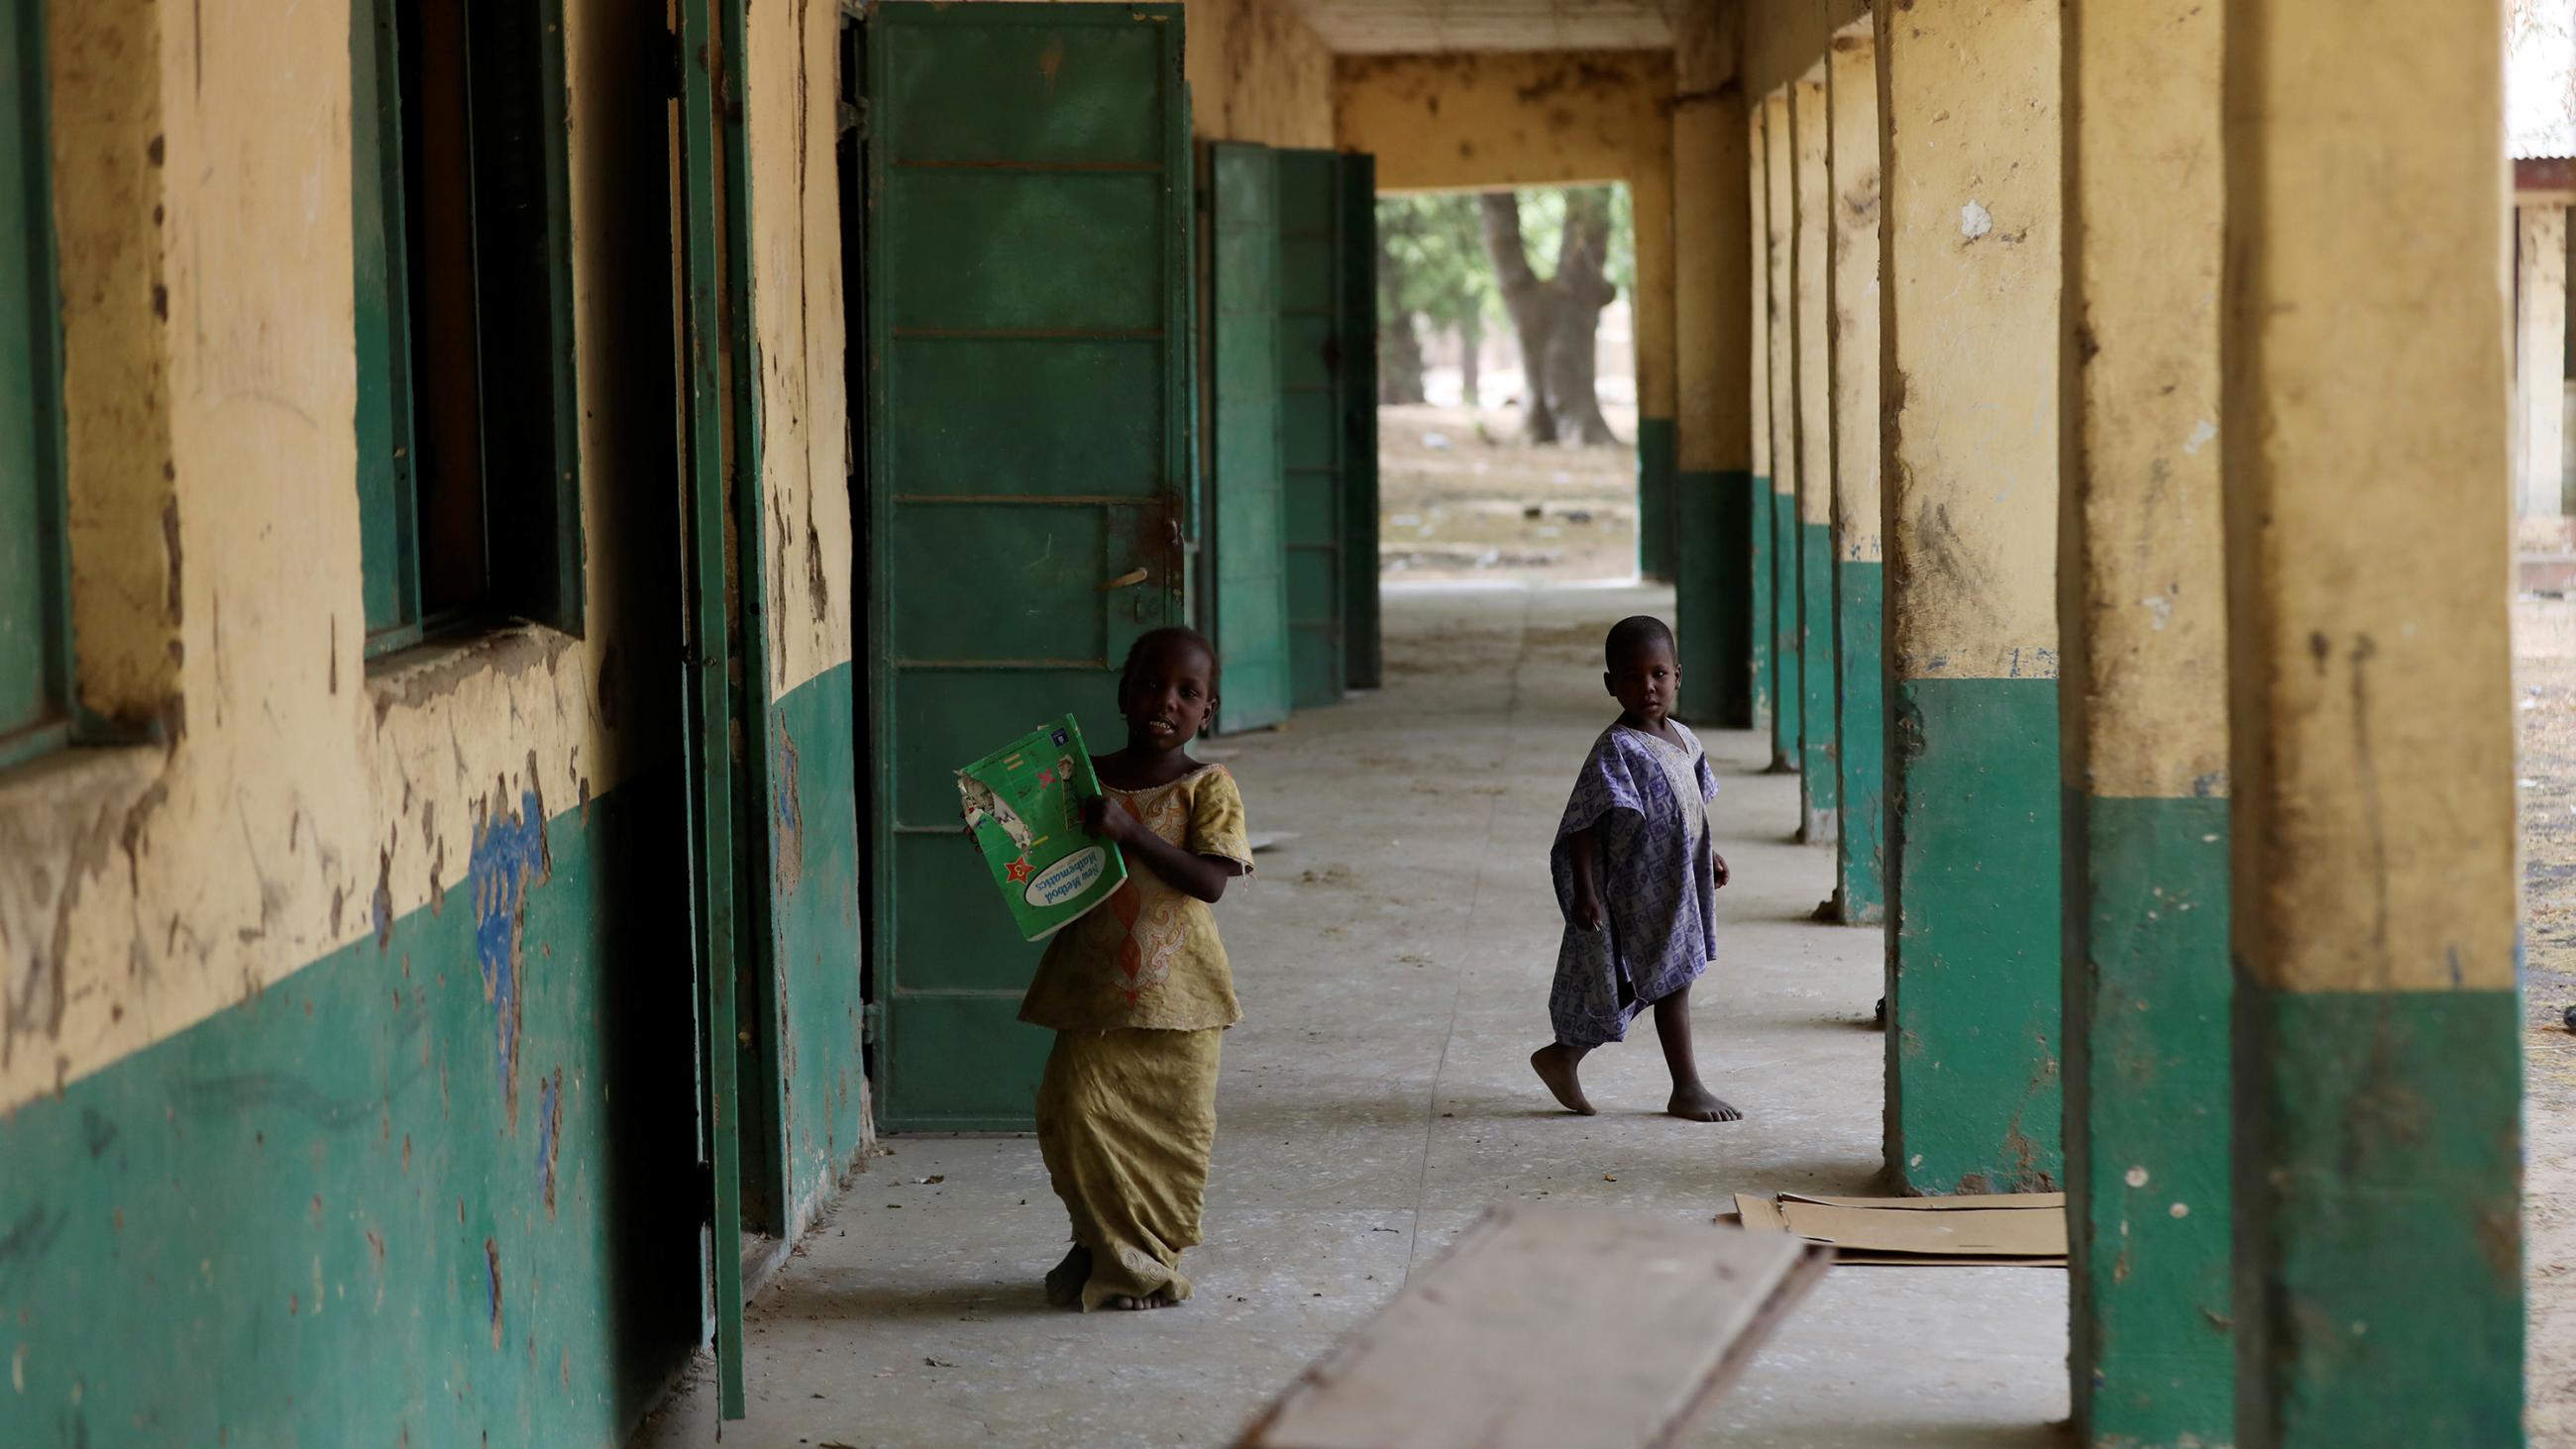  Picture shows two children walking along an outdoor corridor at a school with large cinder block columns painted green. 